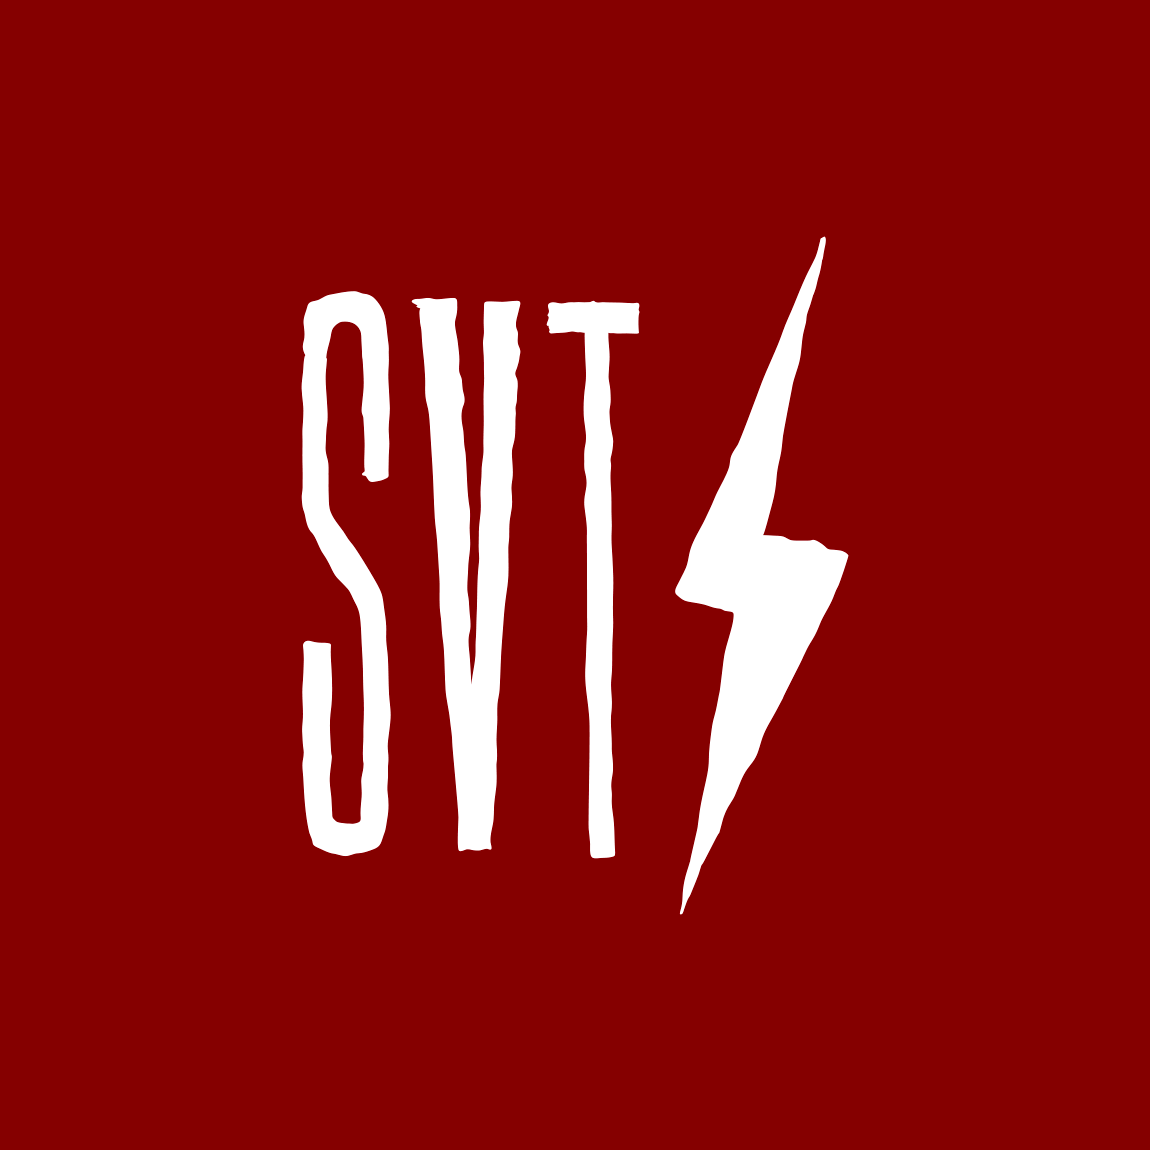 a dark red square. in white, the letters S V T and a lightning bolt.